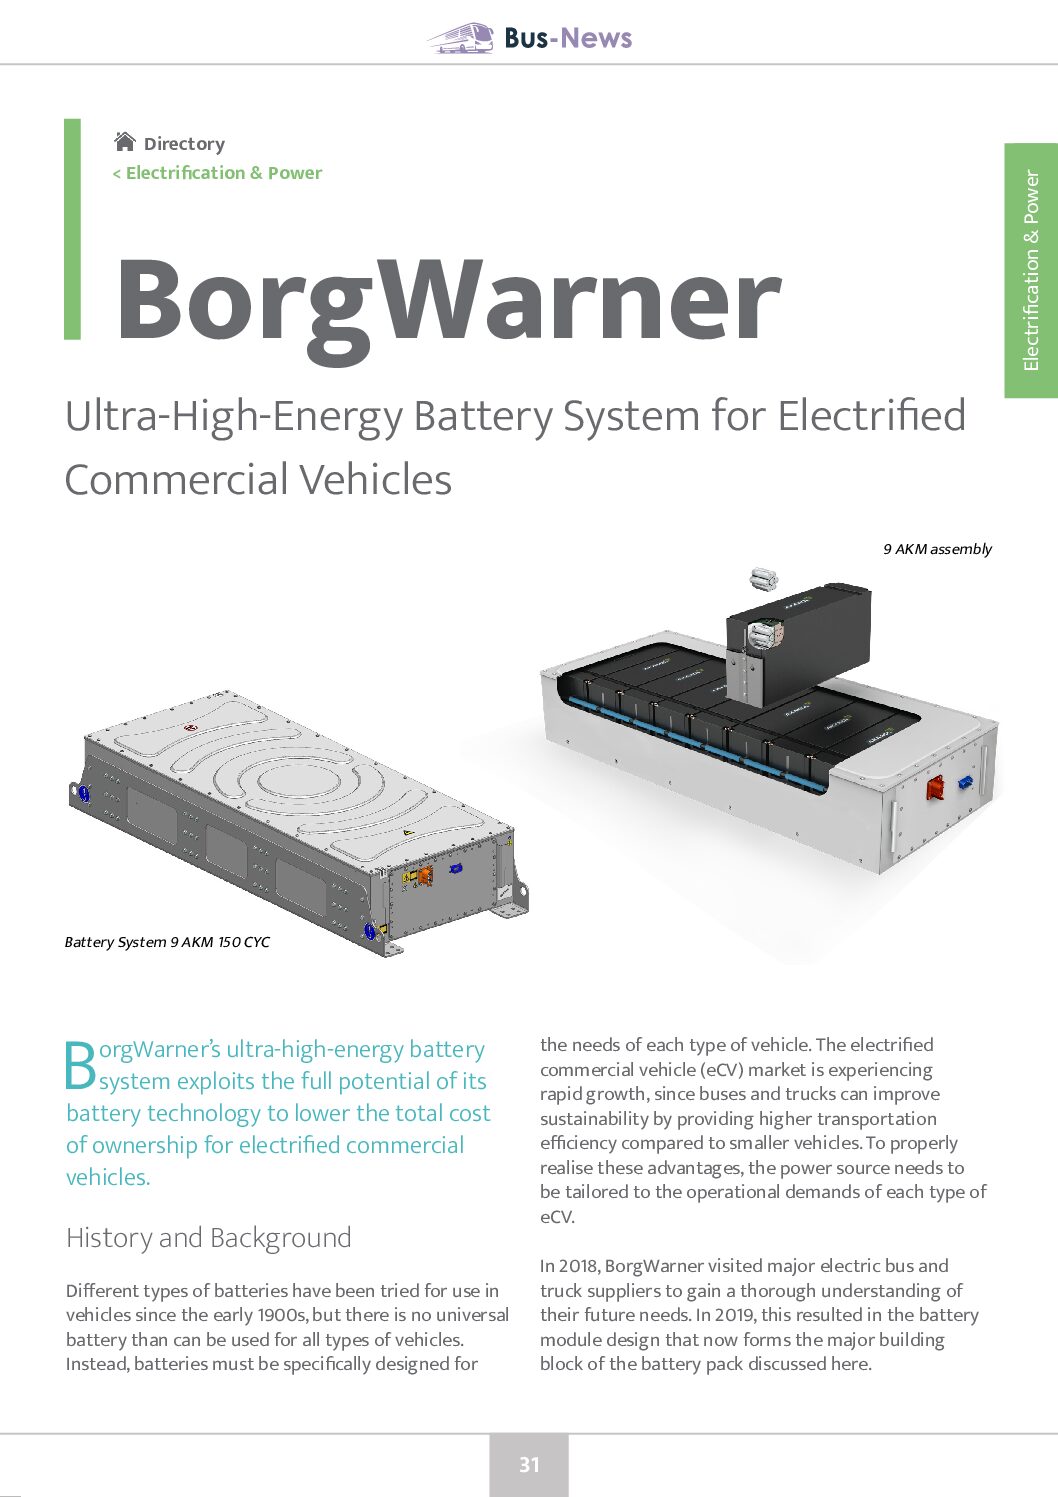 Ultra-High-Energy Battery System for Electrified Vehicles